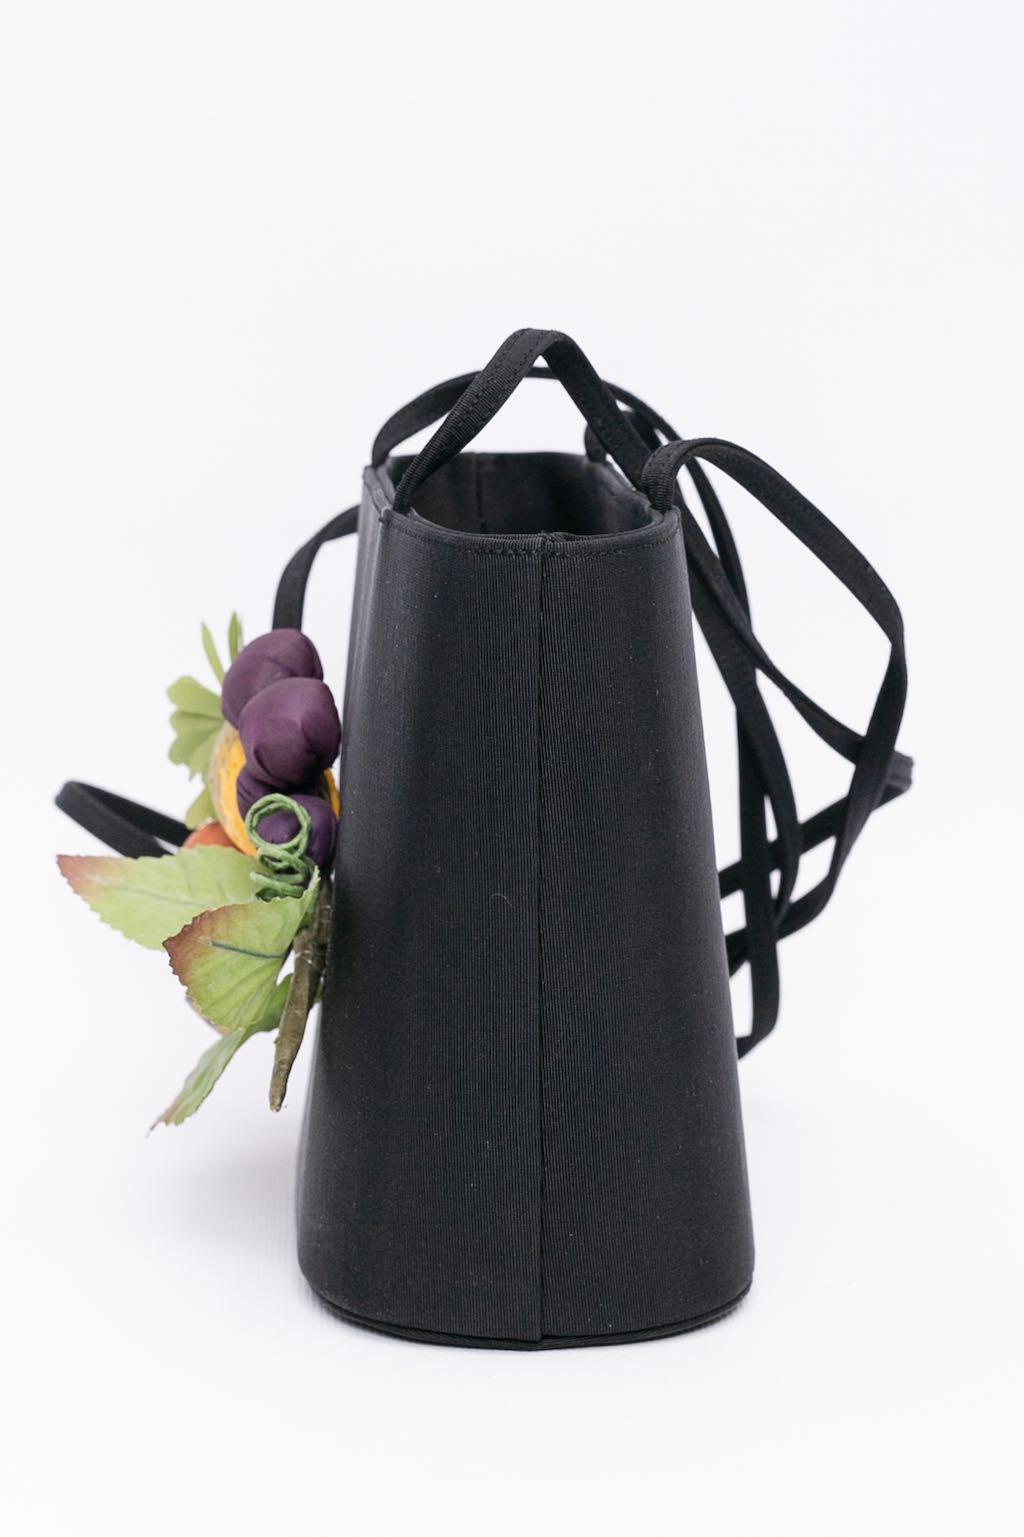 Andrea Pfister Fruits Bag in Black Fabric In Excellent Condition For Sale In SAINT-OUEN-SUR-SEINE, FR